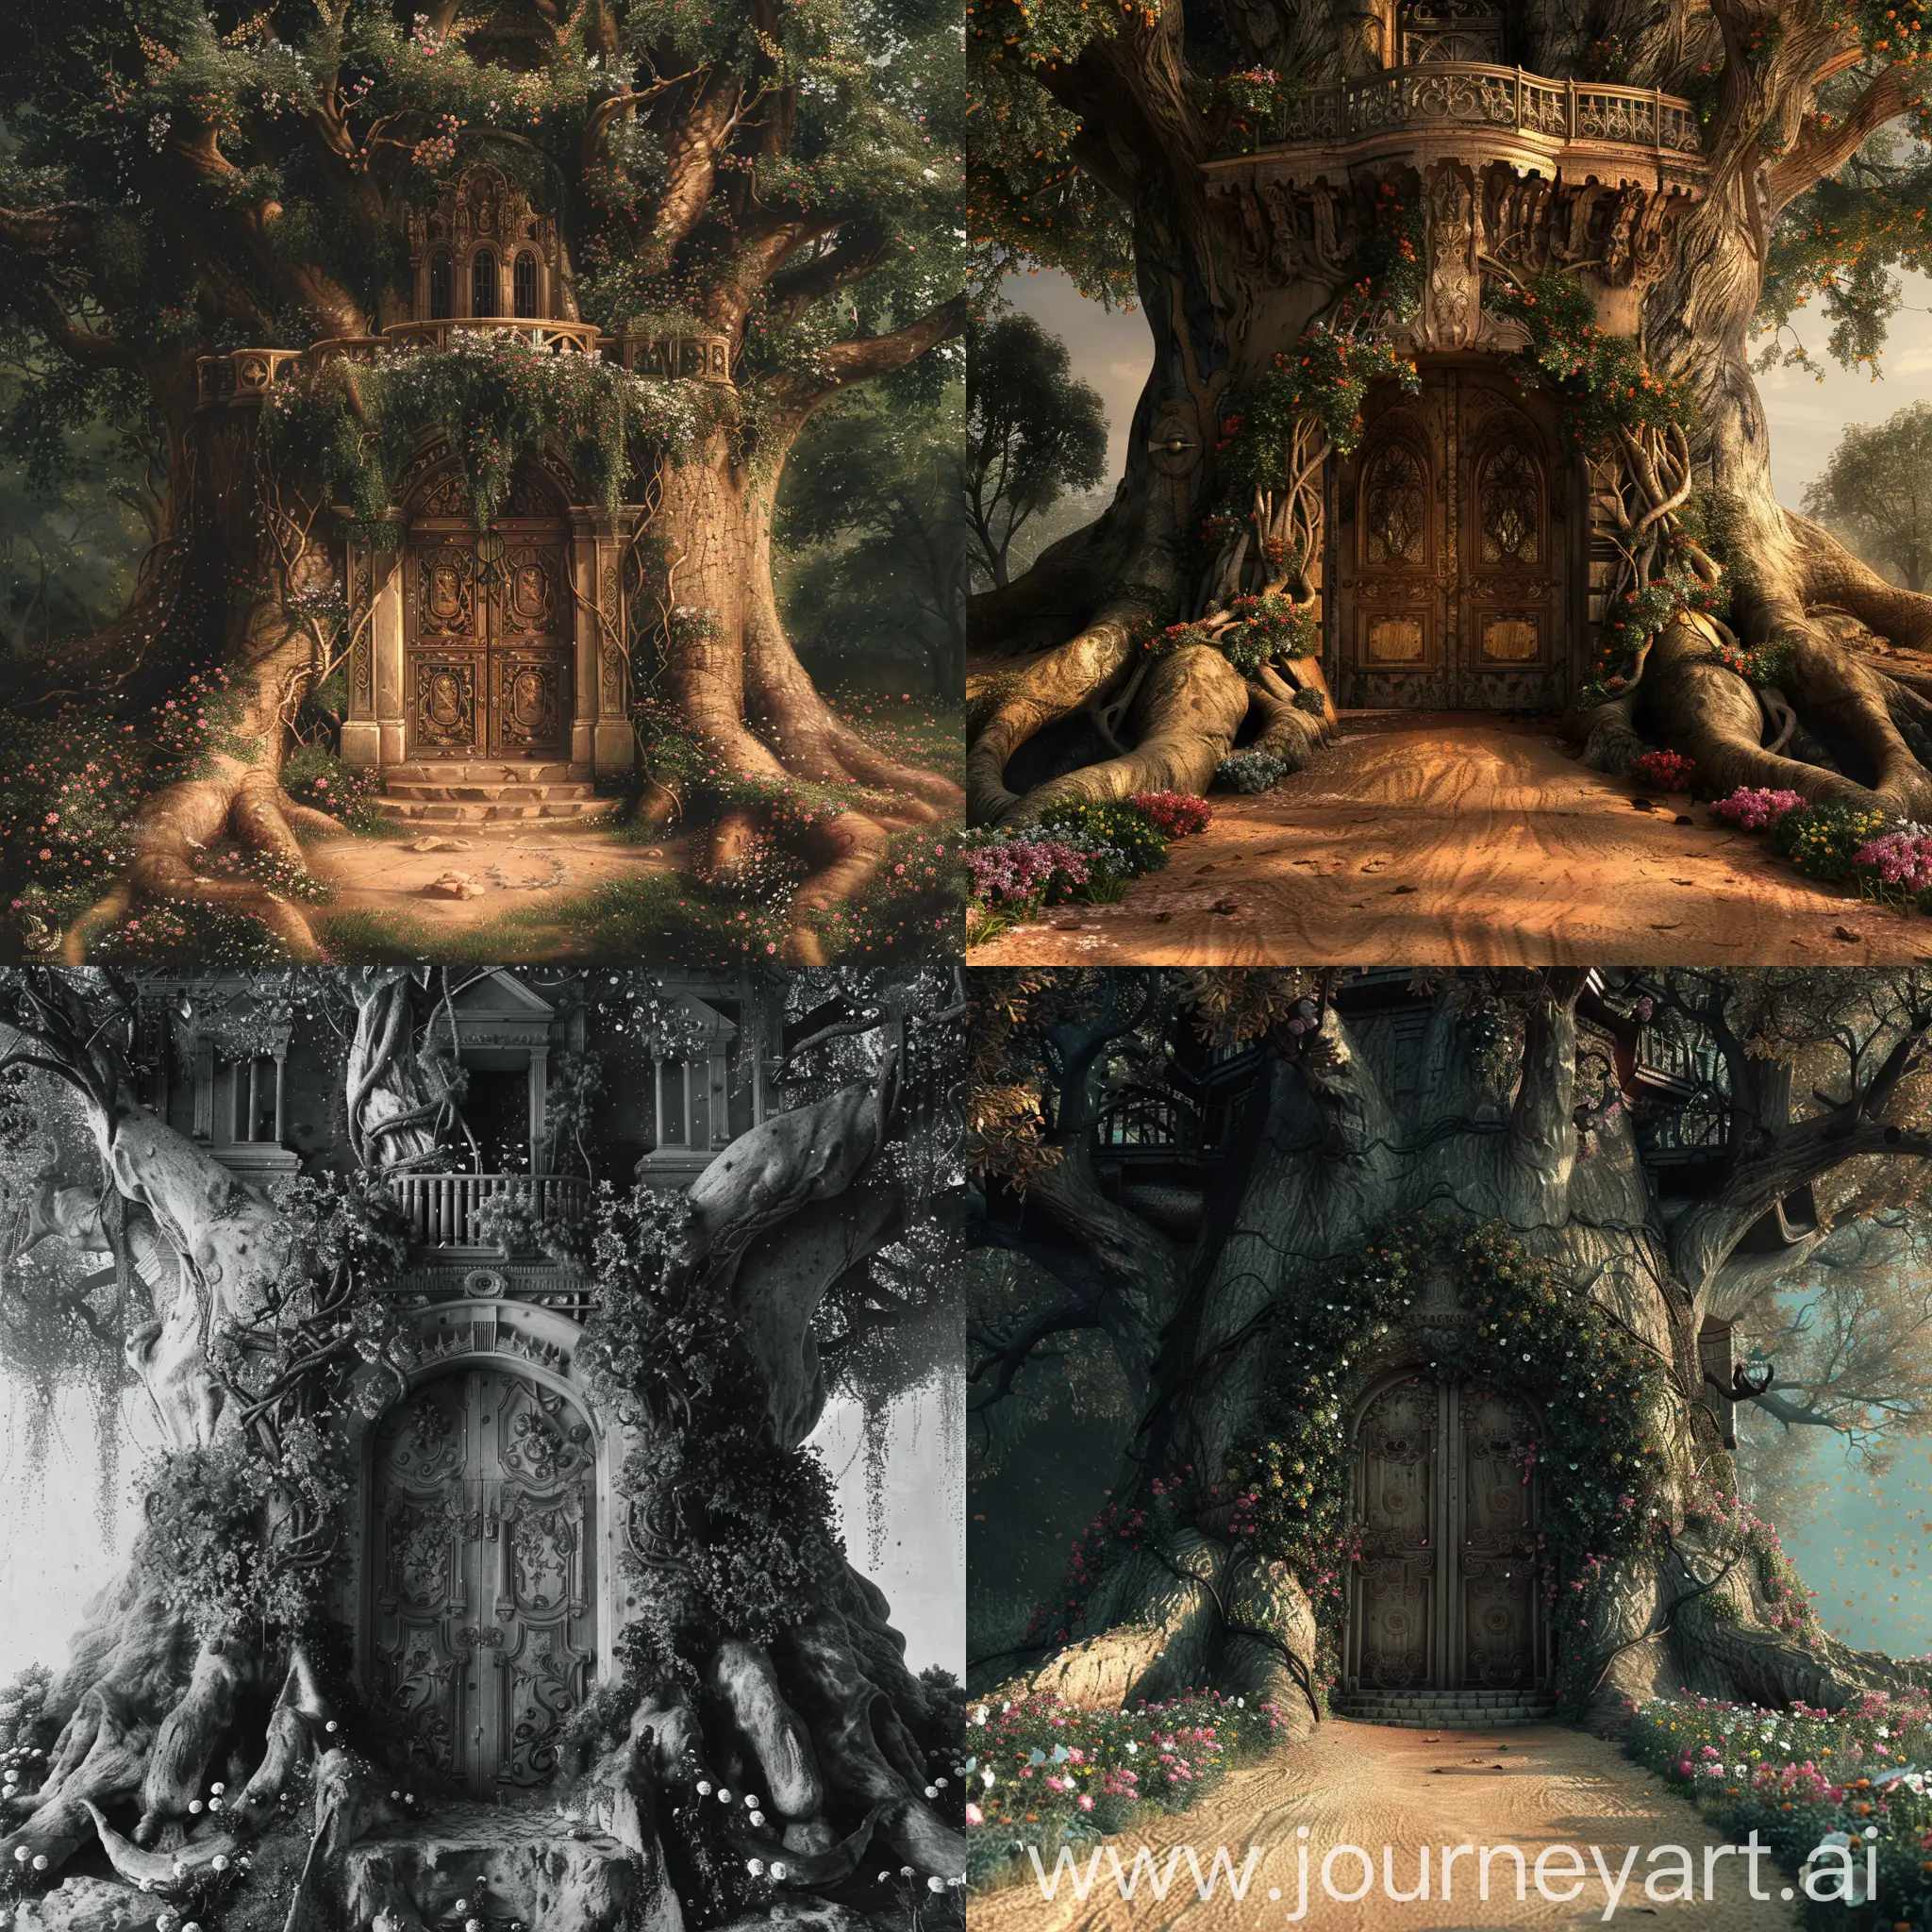 Enchanted-Forest-Cathedral-Majestic-Tree-with-Ornate-Doors-and-Floral-Decor